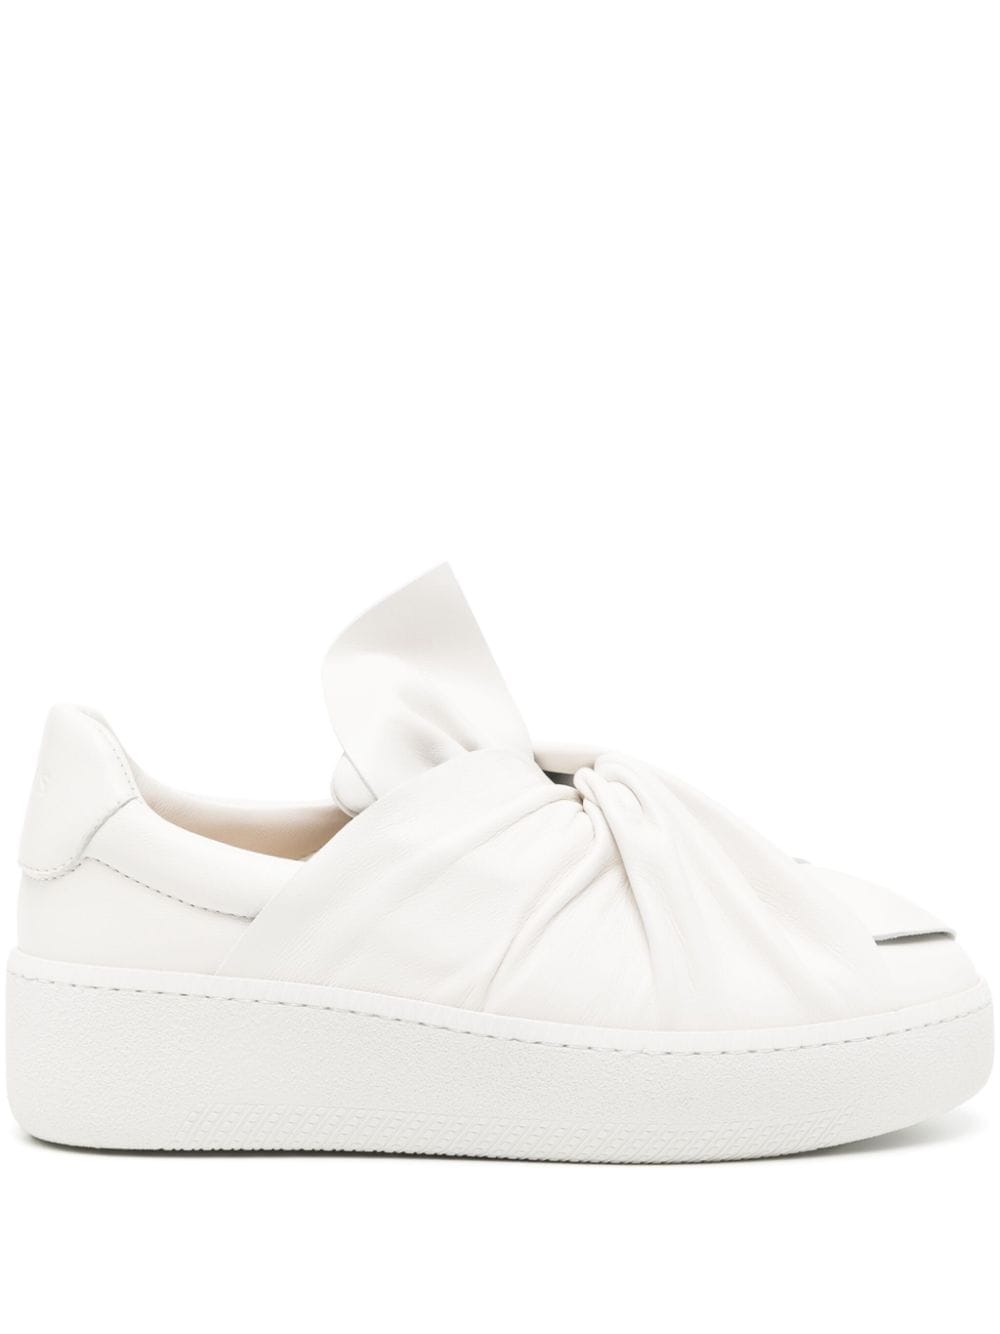 Ports 1961 Bee Leather Trainers In White